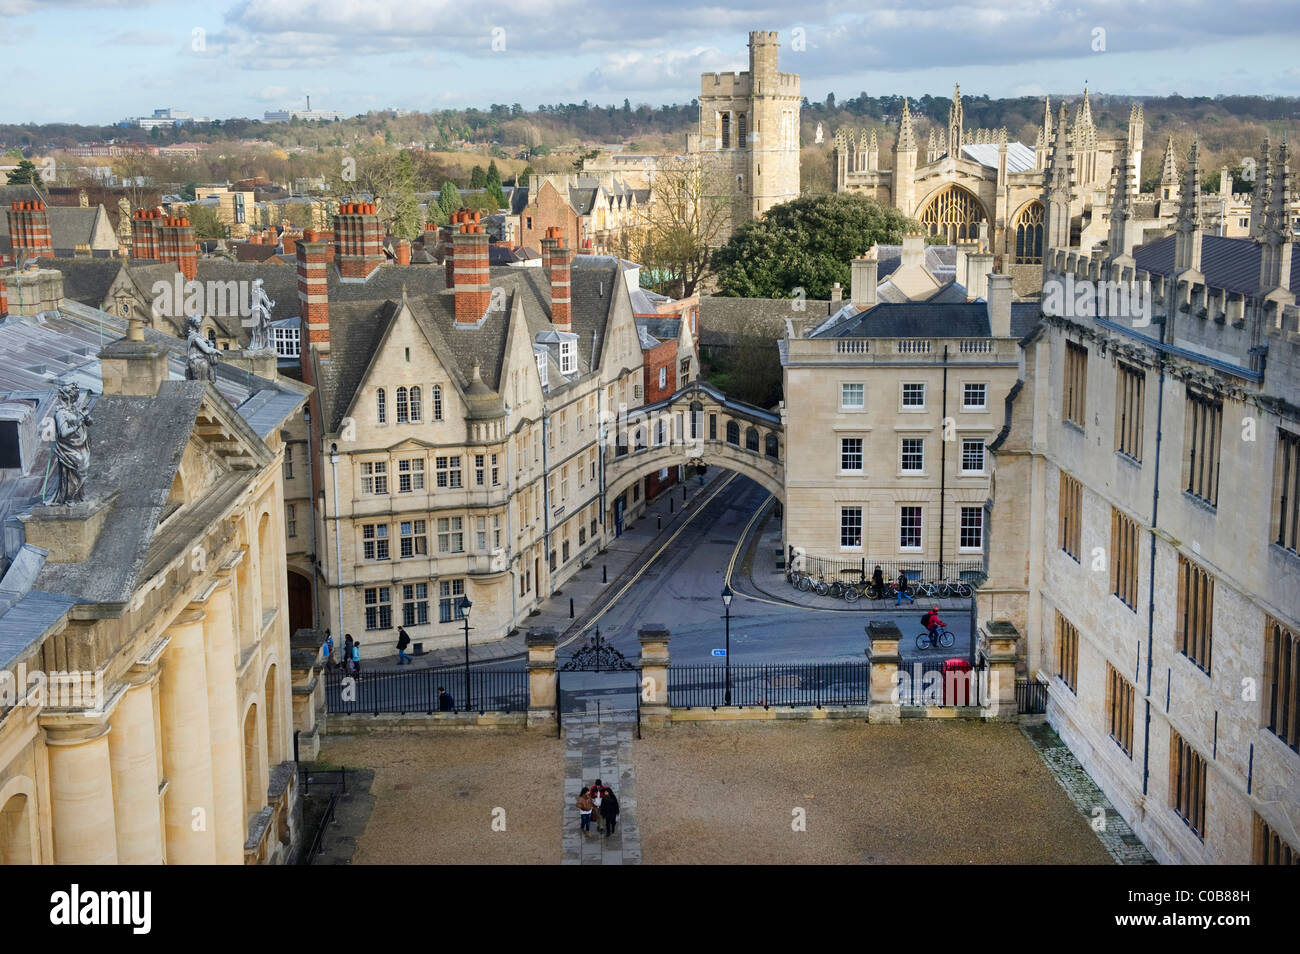 Looking down at Hertford's so called Bridge of Sighs after the one in Venice. Stock Photo